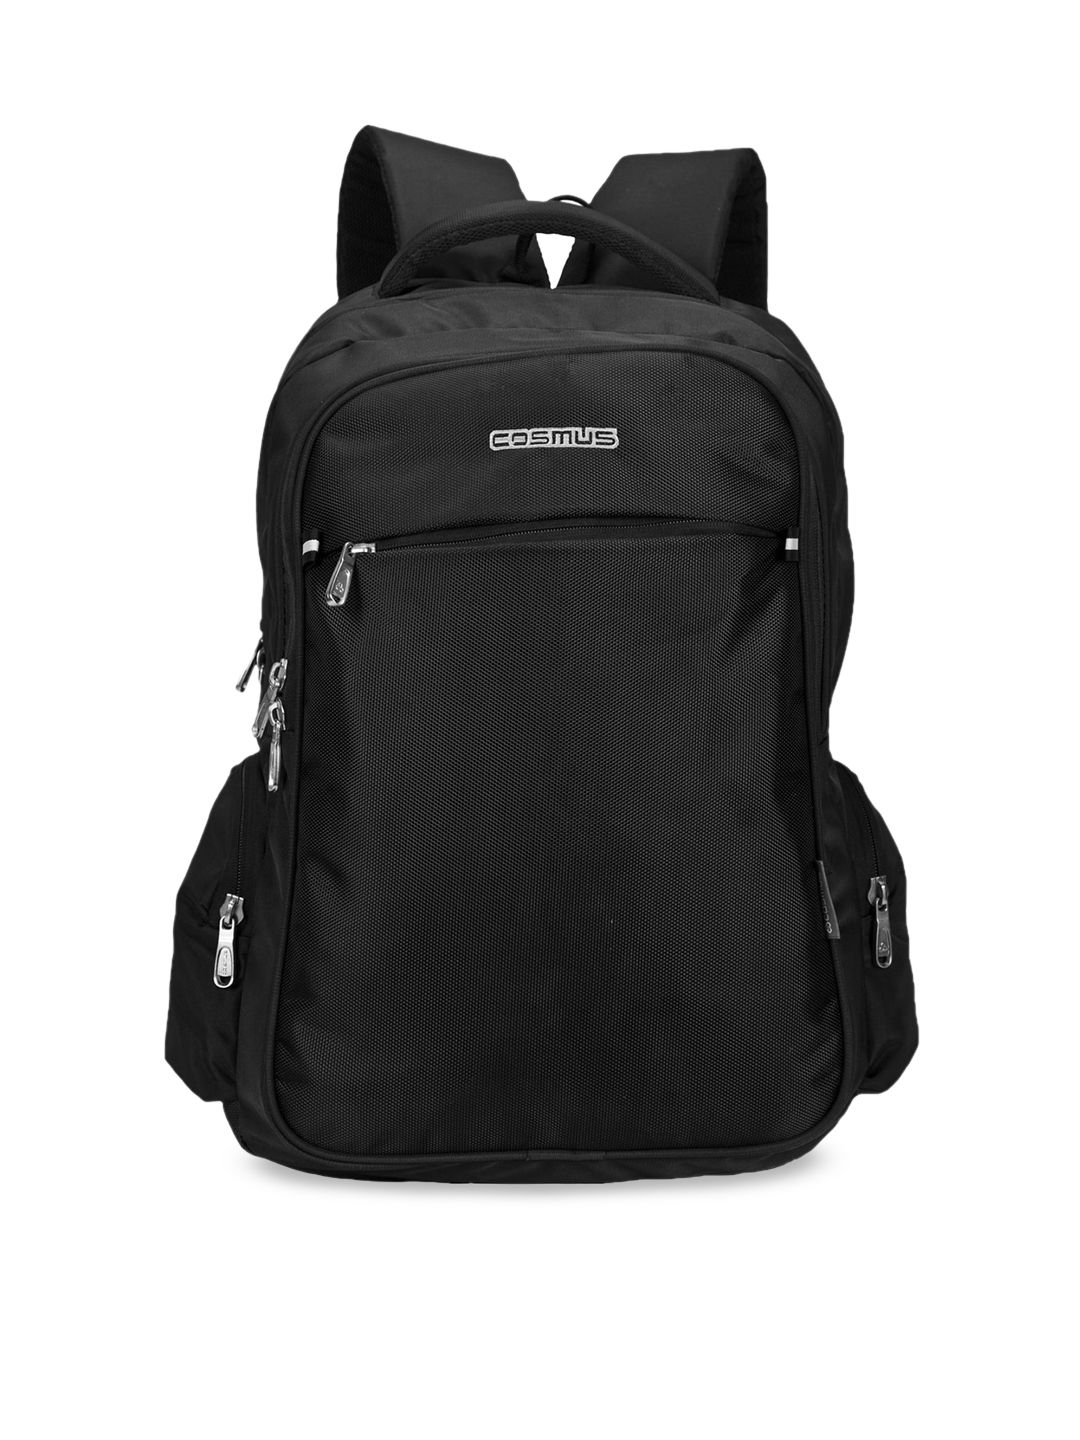 COSMUS Unisex Black Solid Backpack Price in India